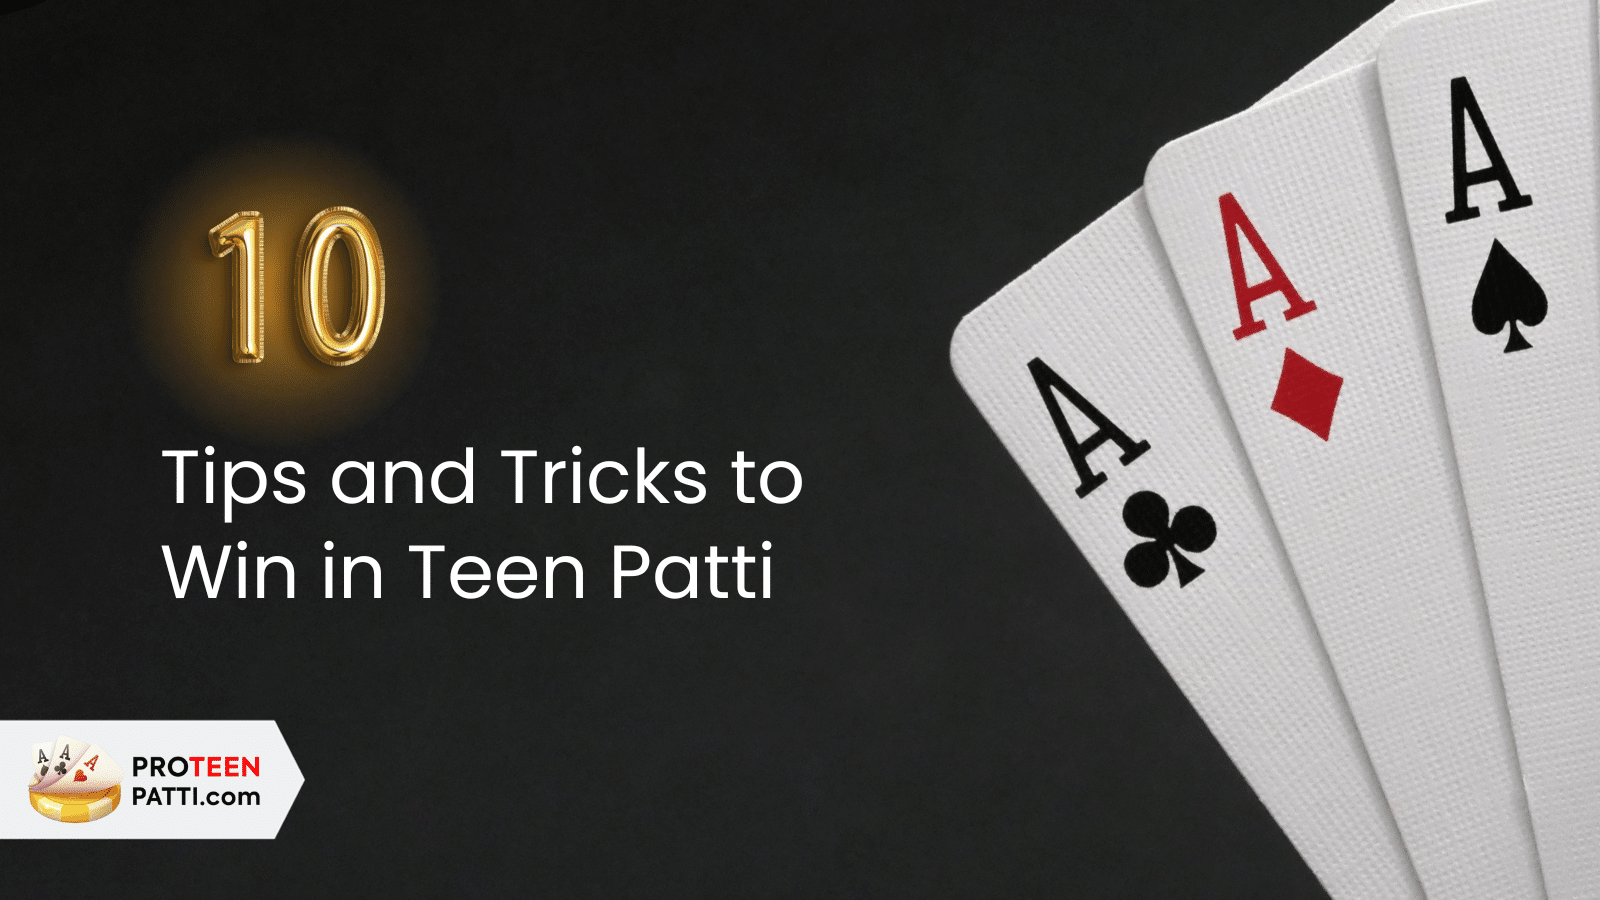 Tips and Tricks to Win in Teen Patti